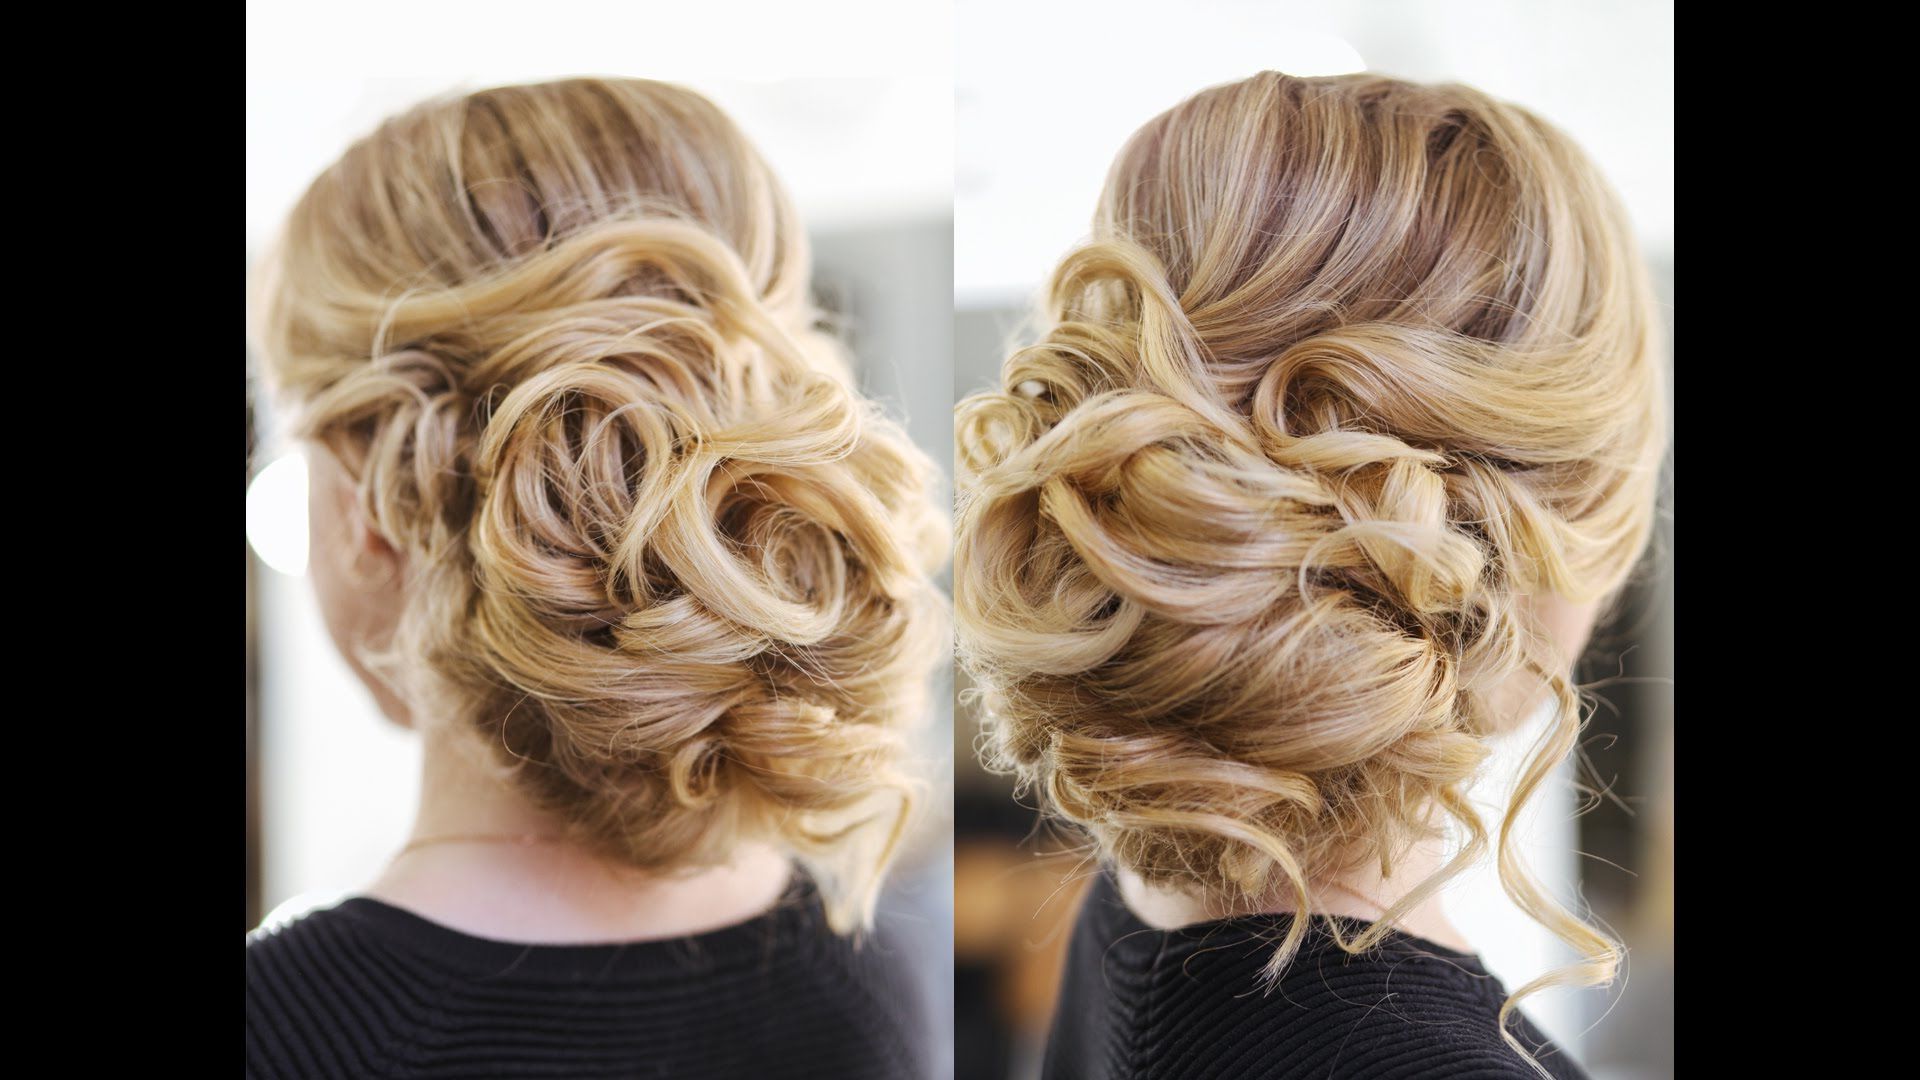 Most Current Elegant Curled Prom Hairstyles Regarding This Video Teaches How To Do A Beautiful, Easy Updo With Big Curls (View 19 of 20)